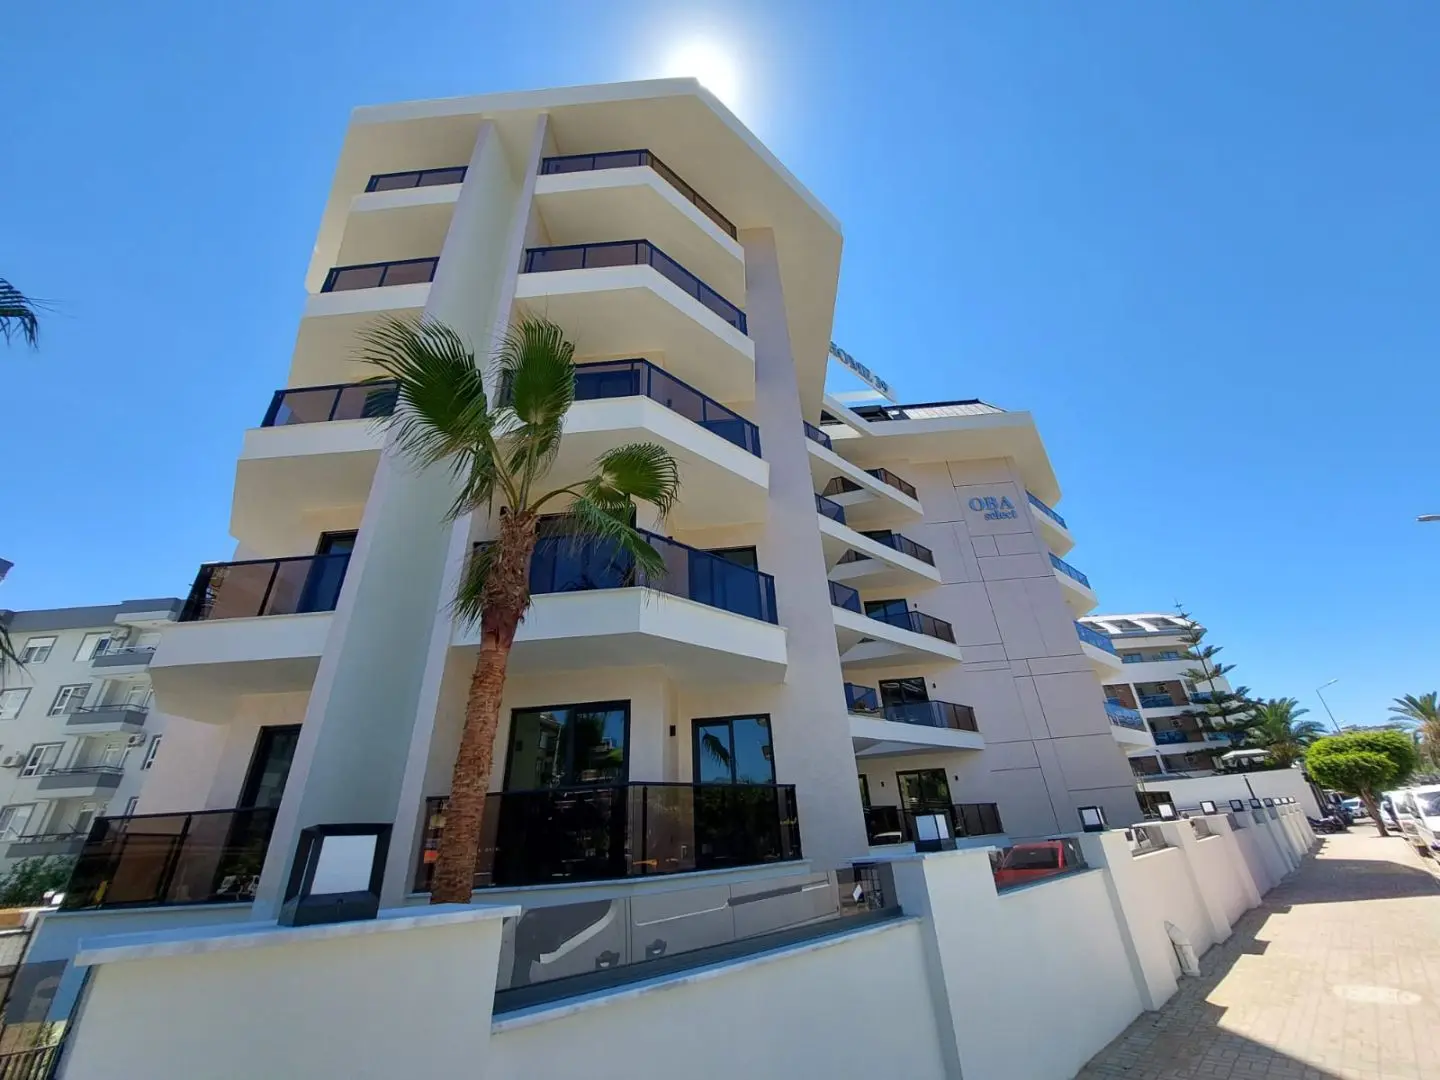 NEW 1+1 FLAT (54M²) JUST 350M FROM THE SEA IN OBA-ALANYA